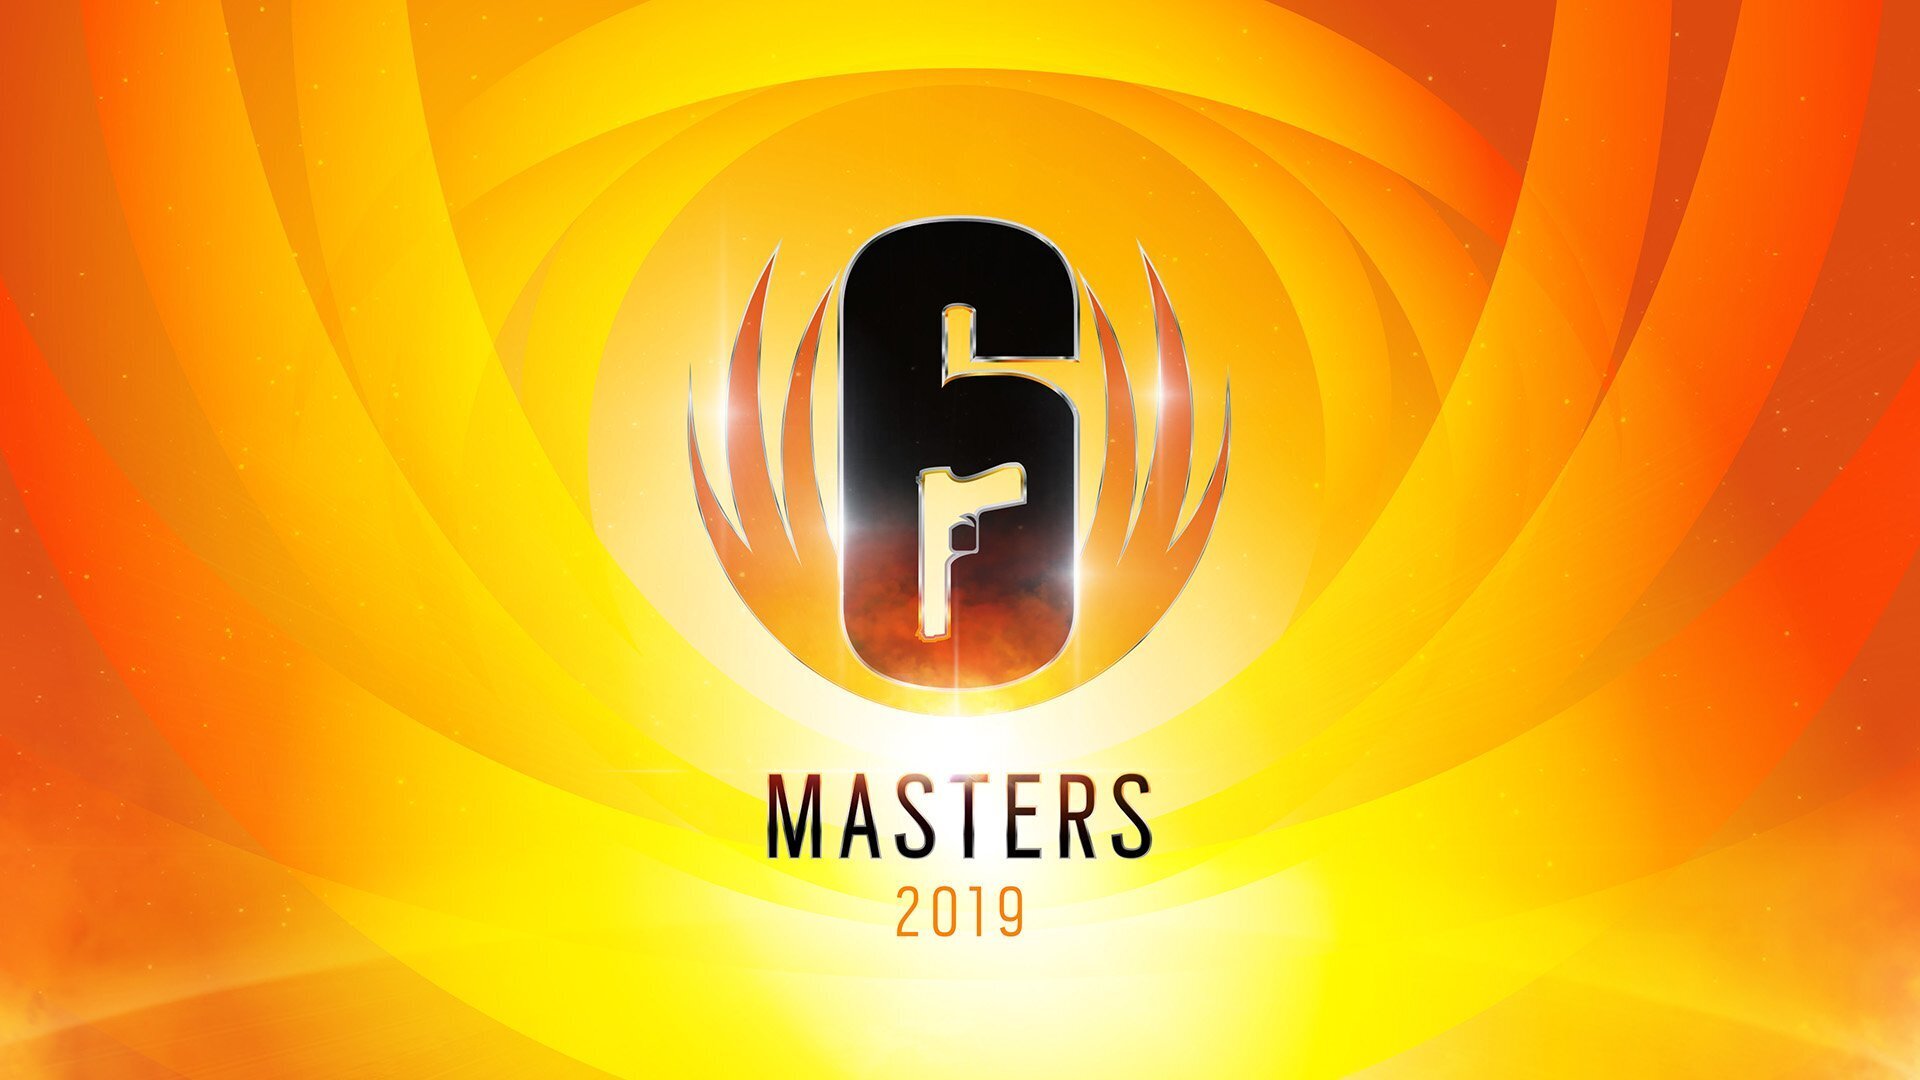 Six Masters will aim to strengthen the Australia and New Zealand competitive scene and improve the grassroots and offer additional competition for the region.